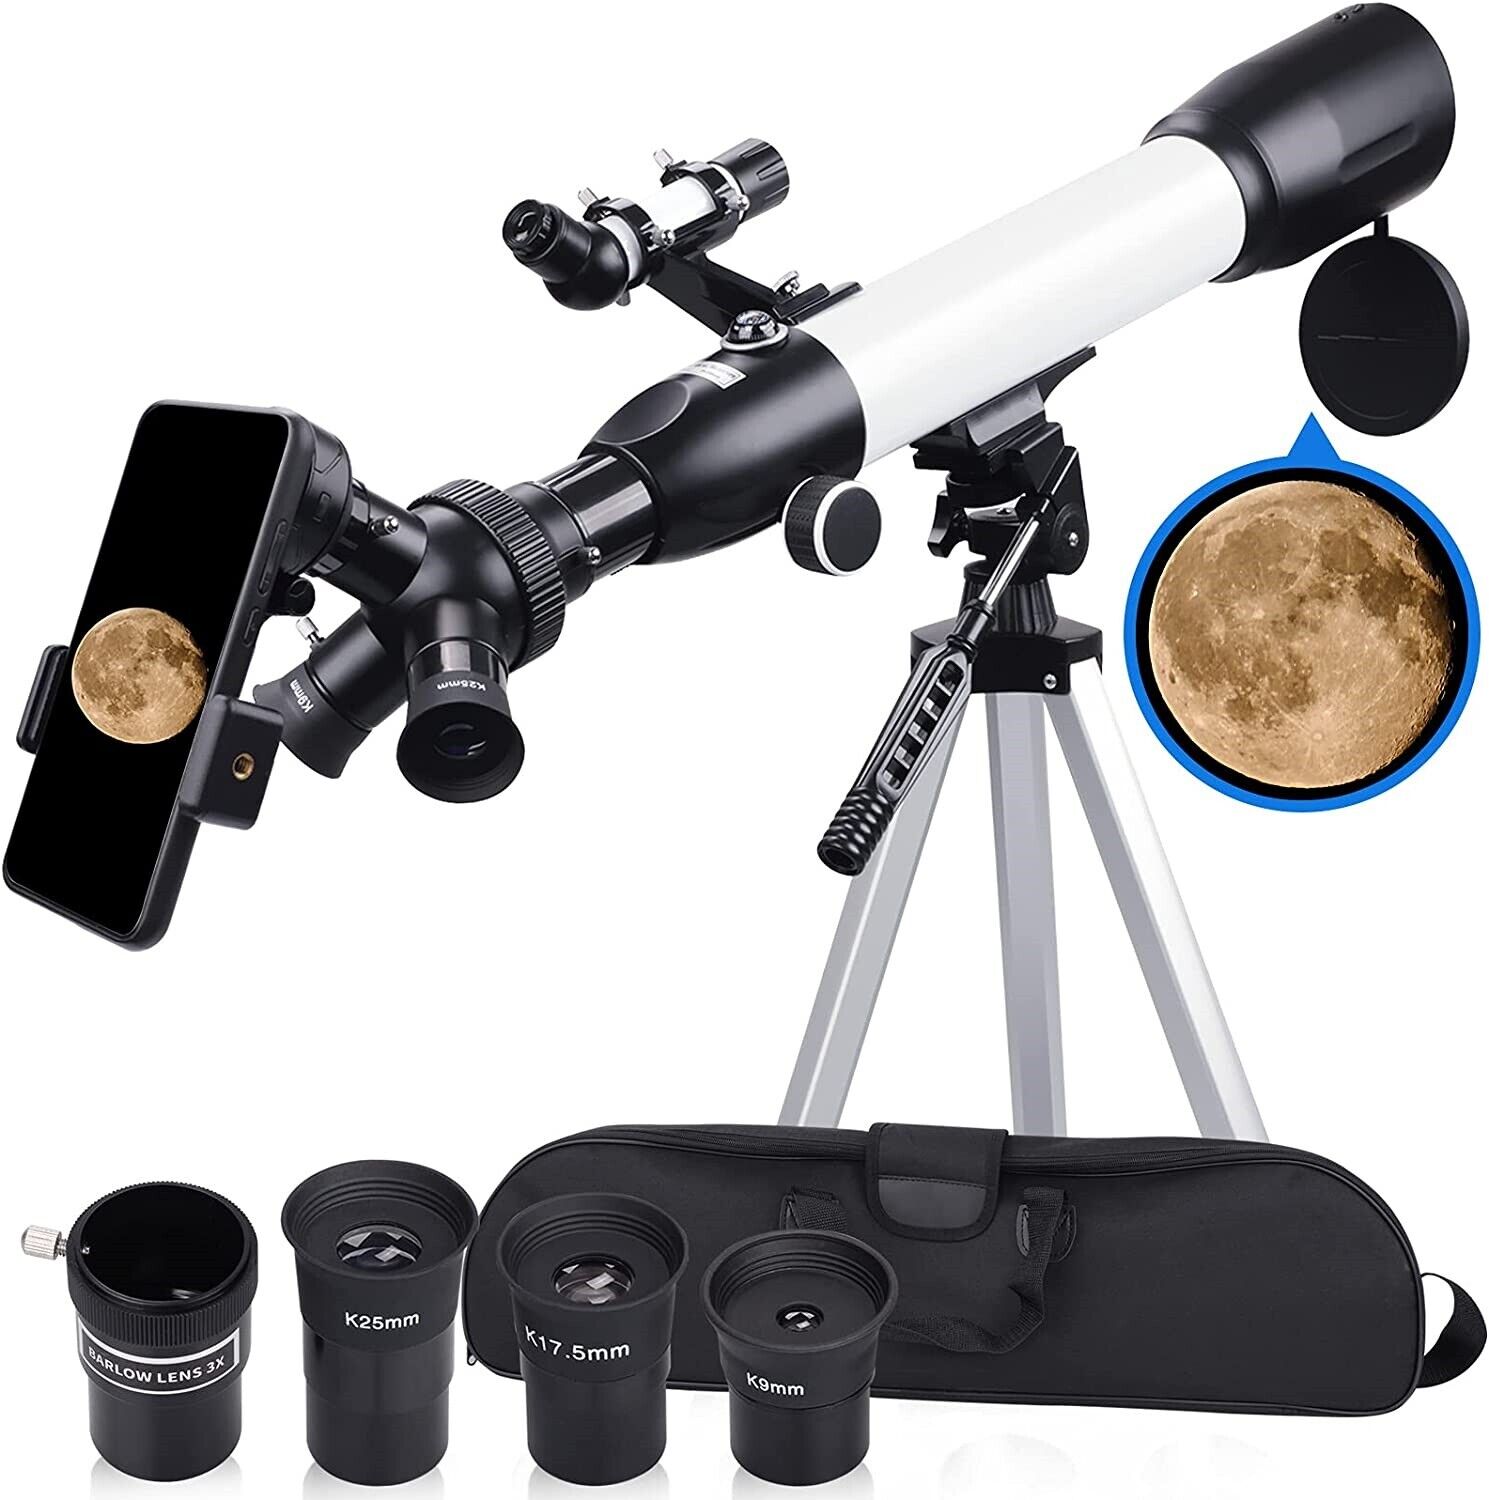 Refractive Professional Astronomical Telescope, HD high Magnification, Dual NEW